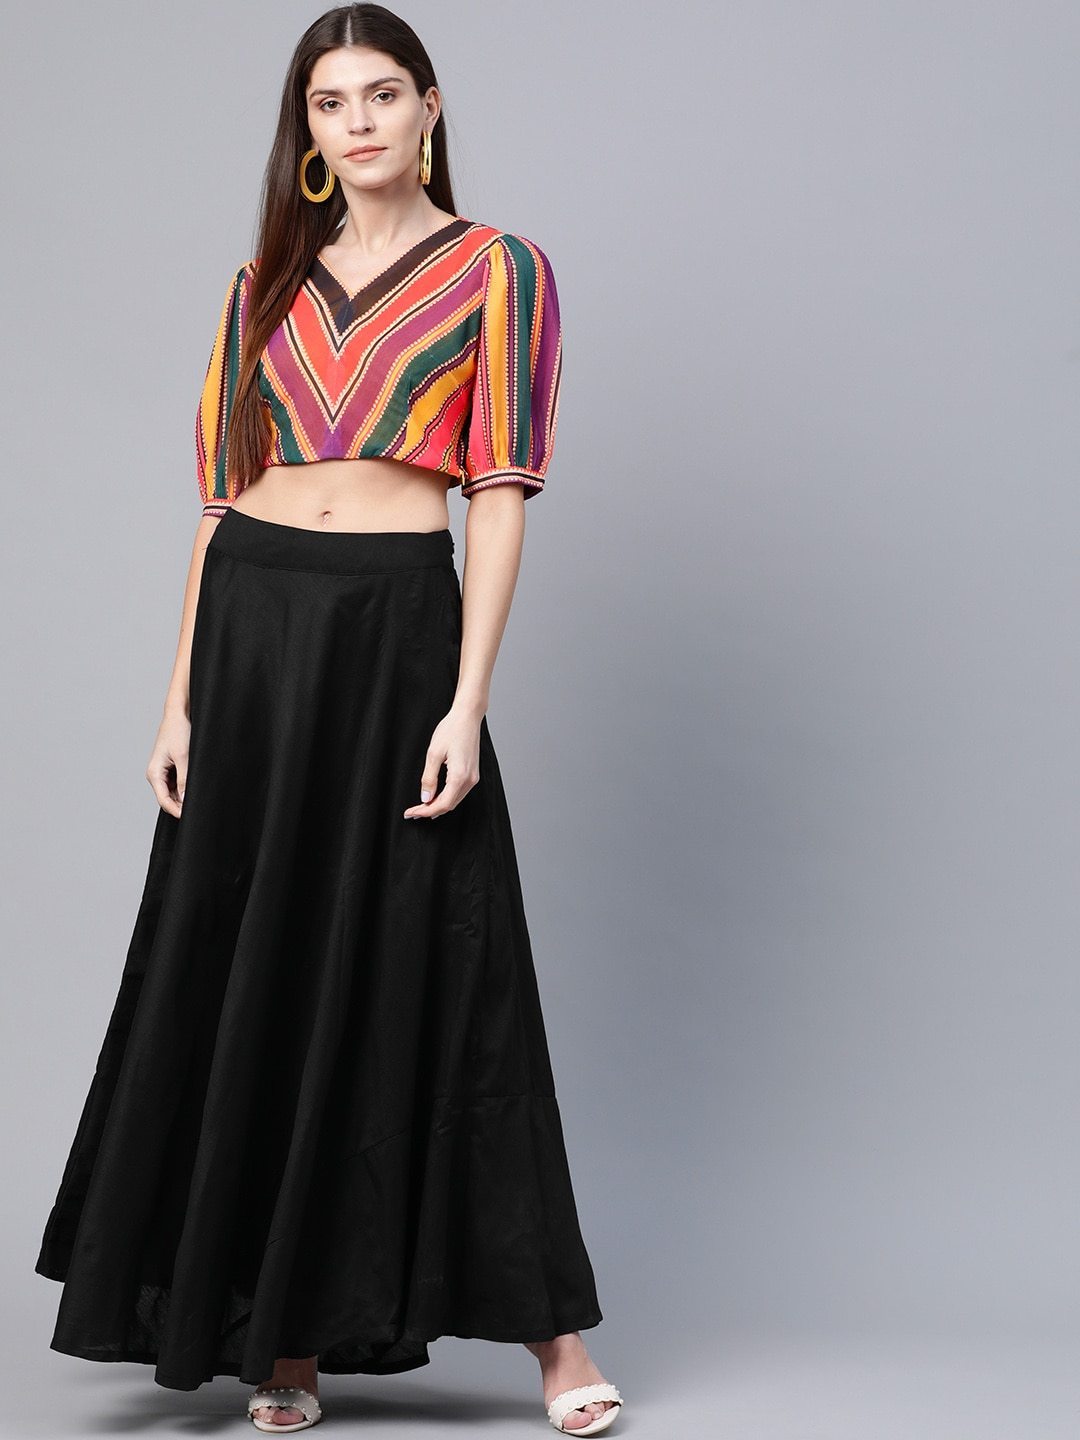 Women's Printed Top with Skirt - AKS